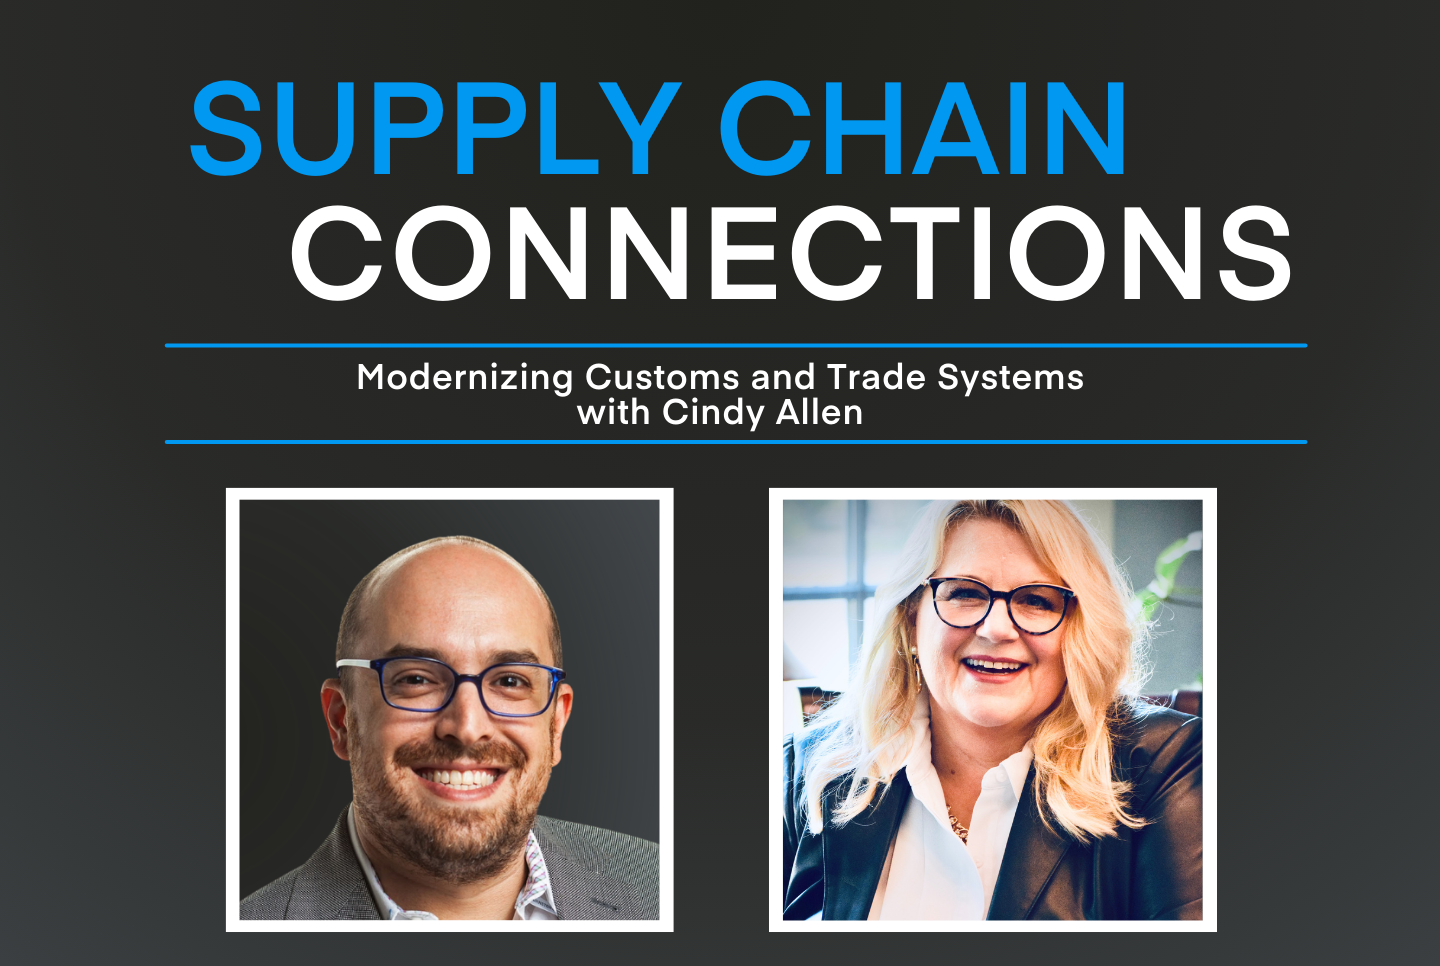 Modernizing Customs and Trade Systems with Cindy Allen